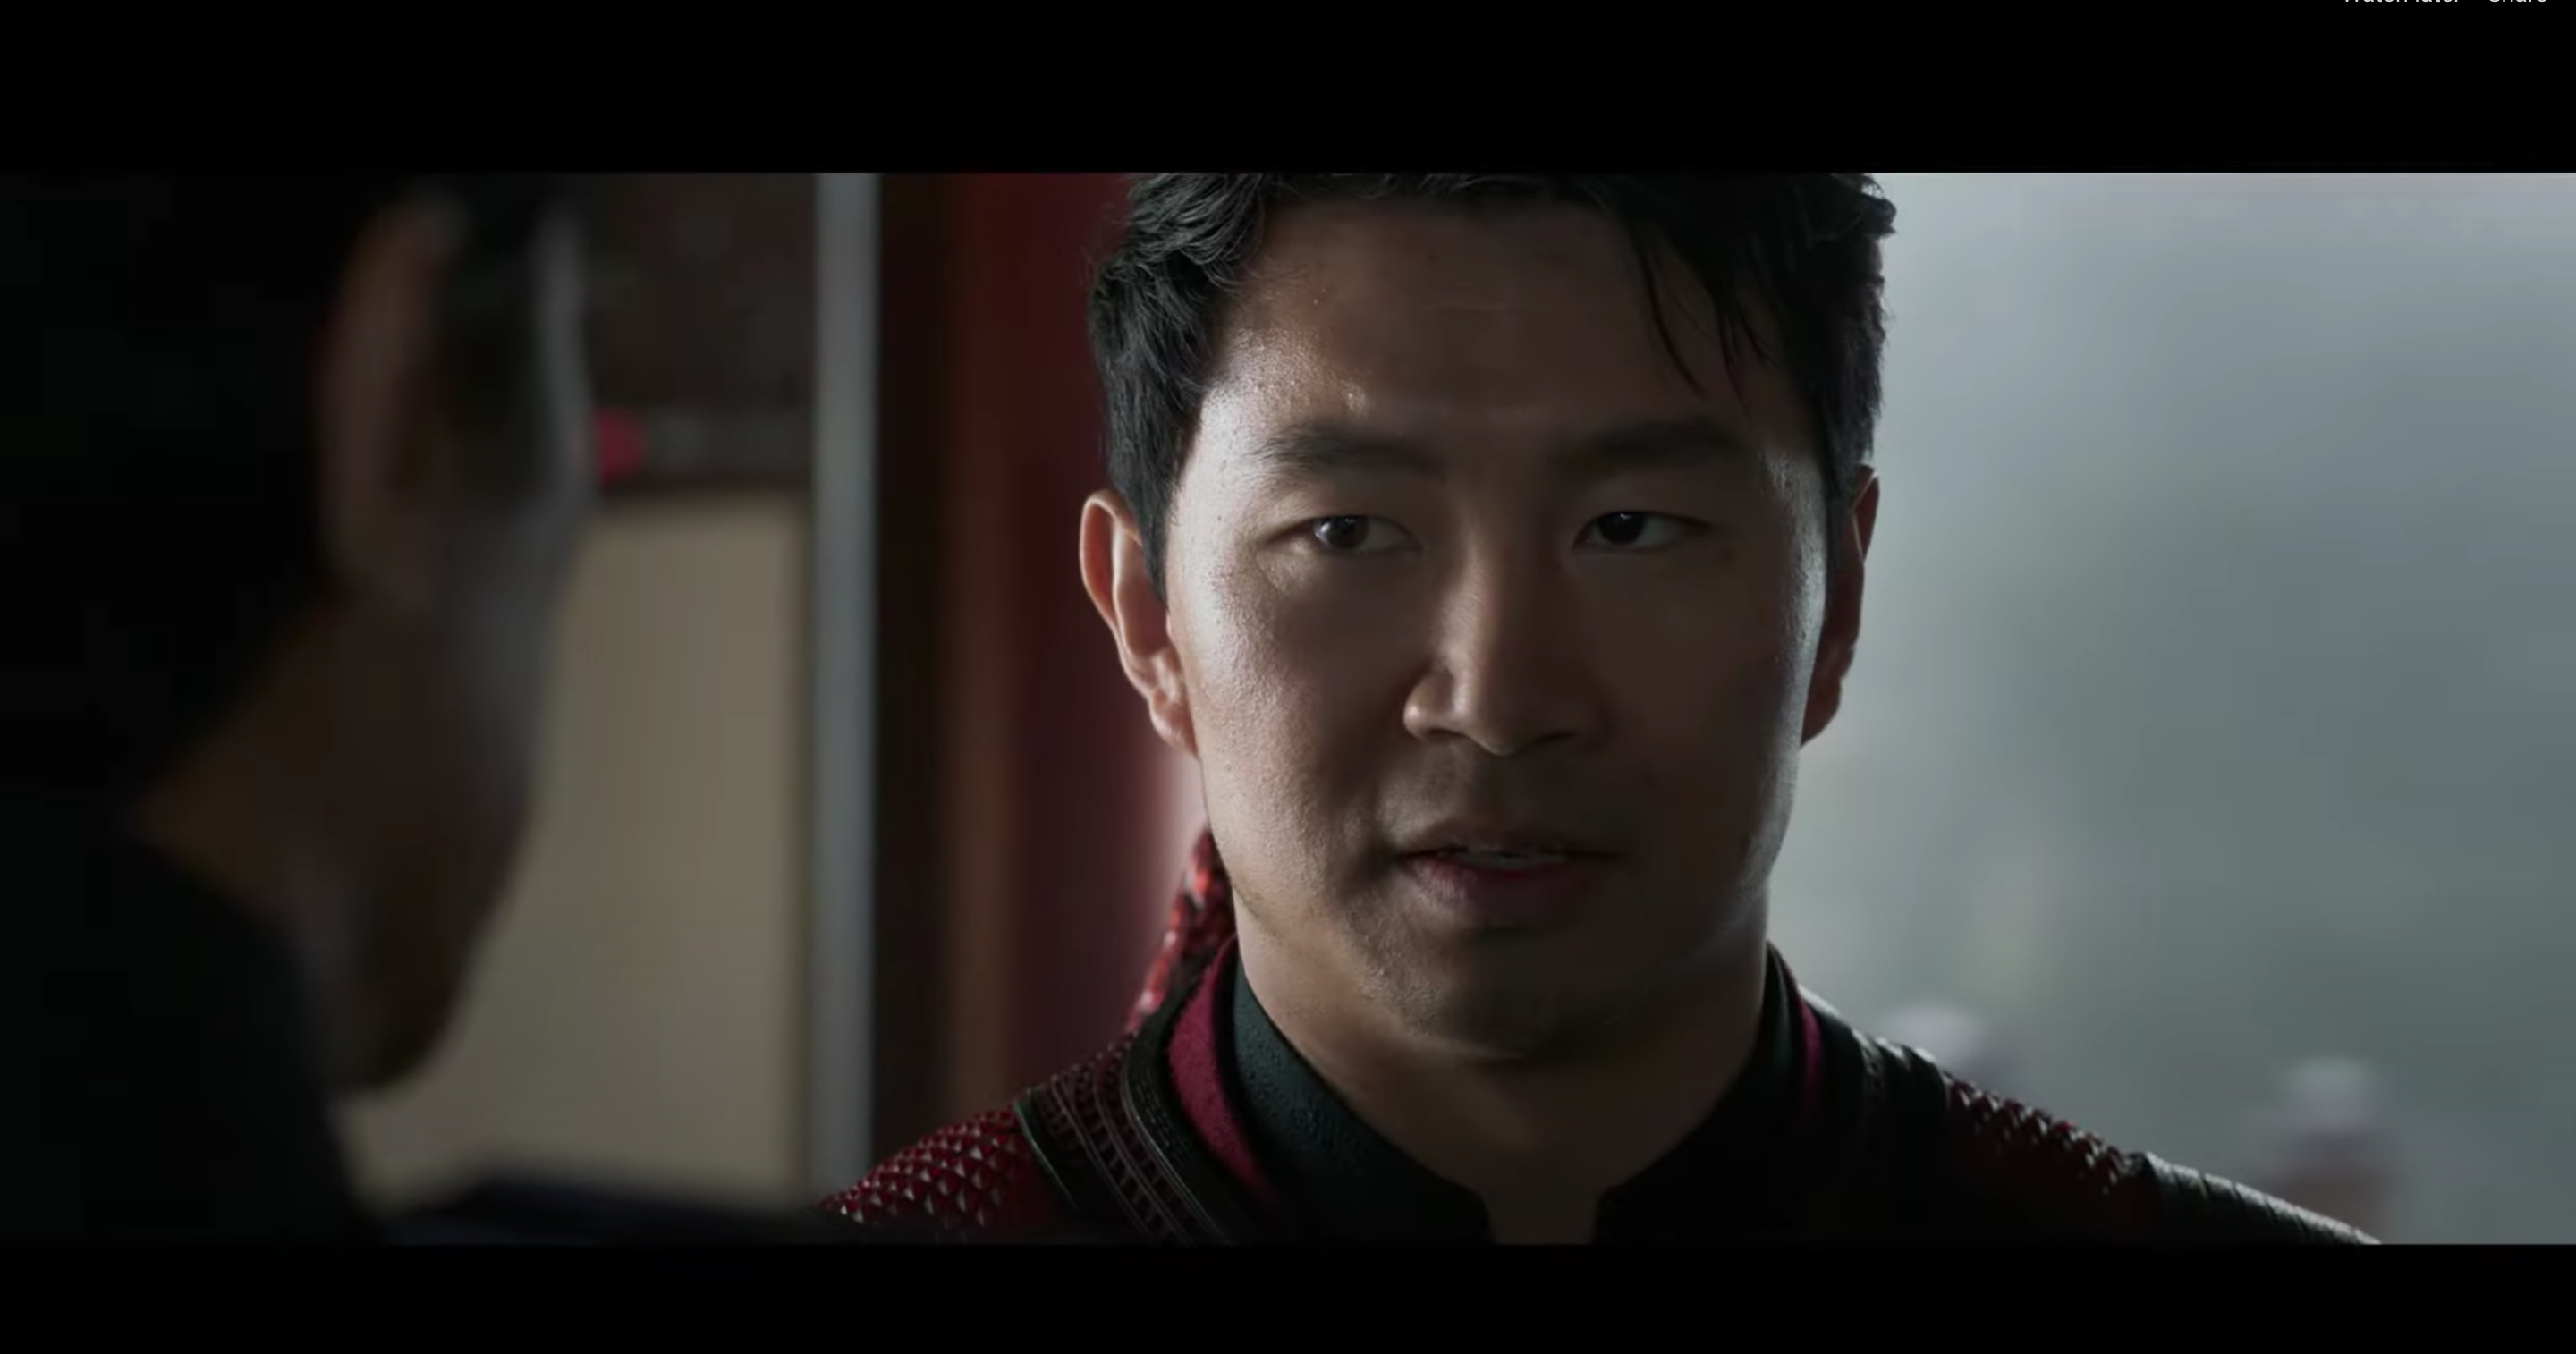 Simu Liu struggles under the weight of his father’s legacy in new Shang-Chi And The Legend Of The Ten Rings teaser